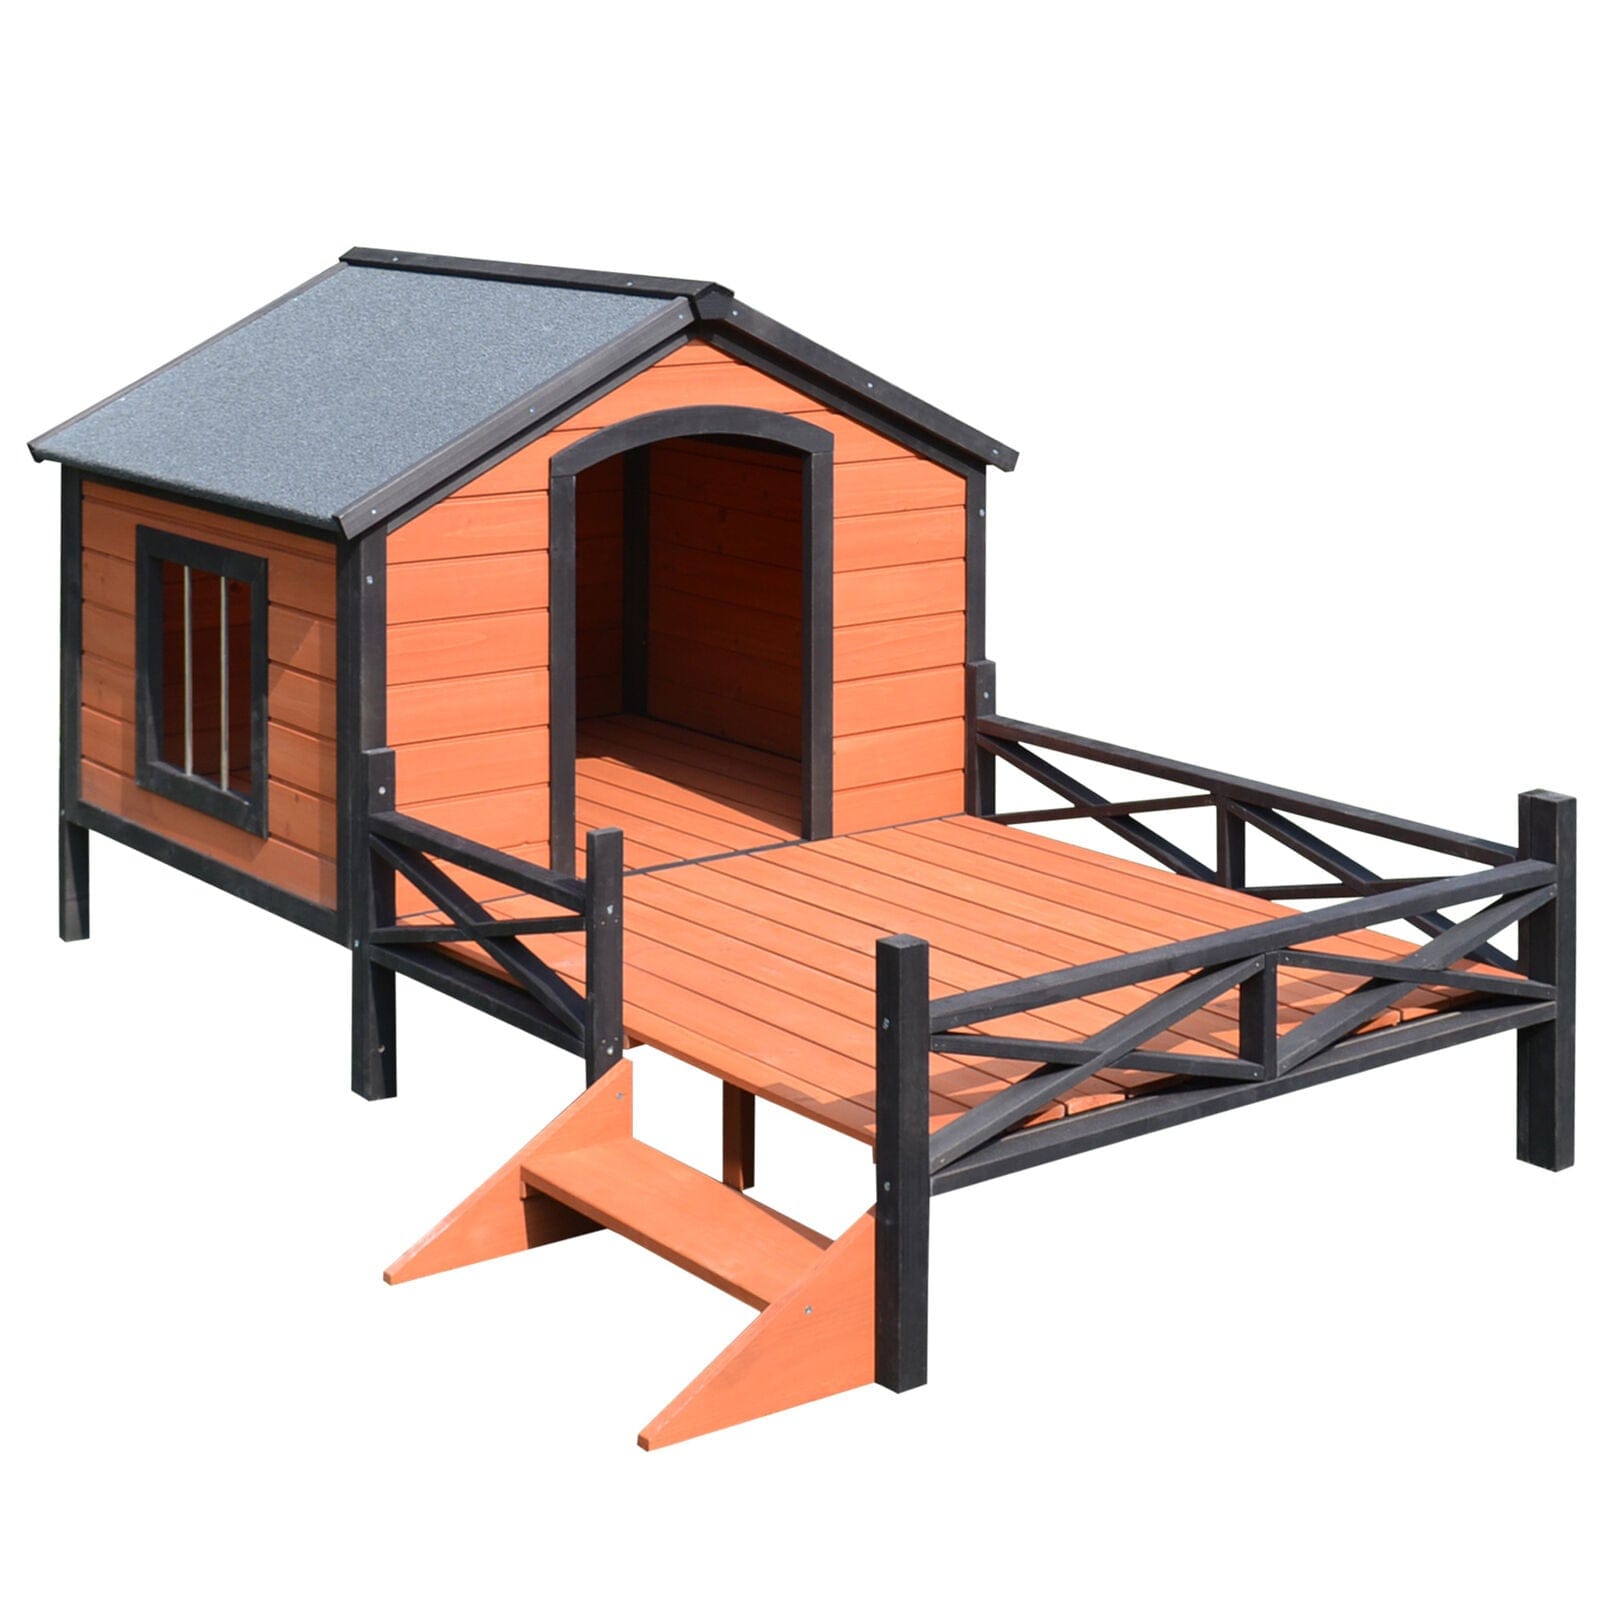 Large Wooden Outdoor Dog House With Porch - Merchandise Plug